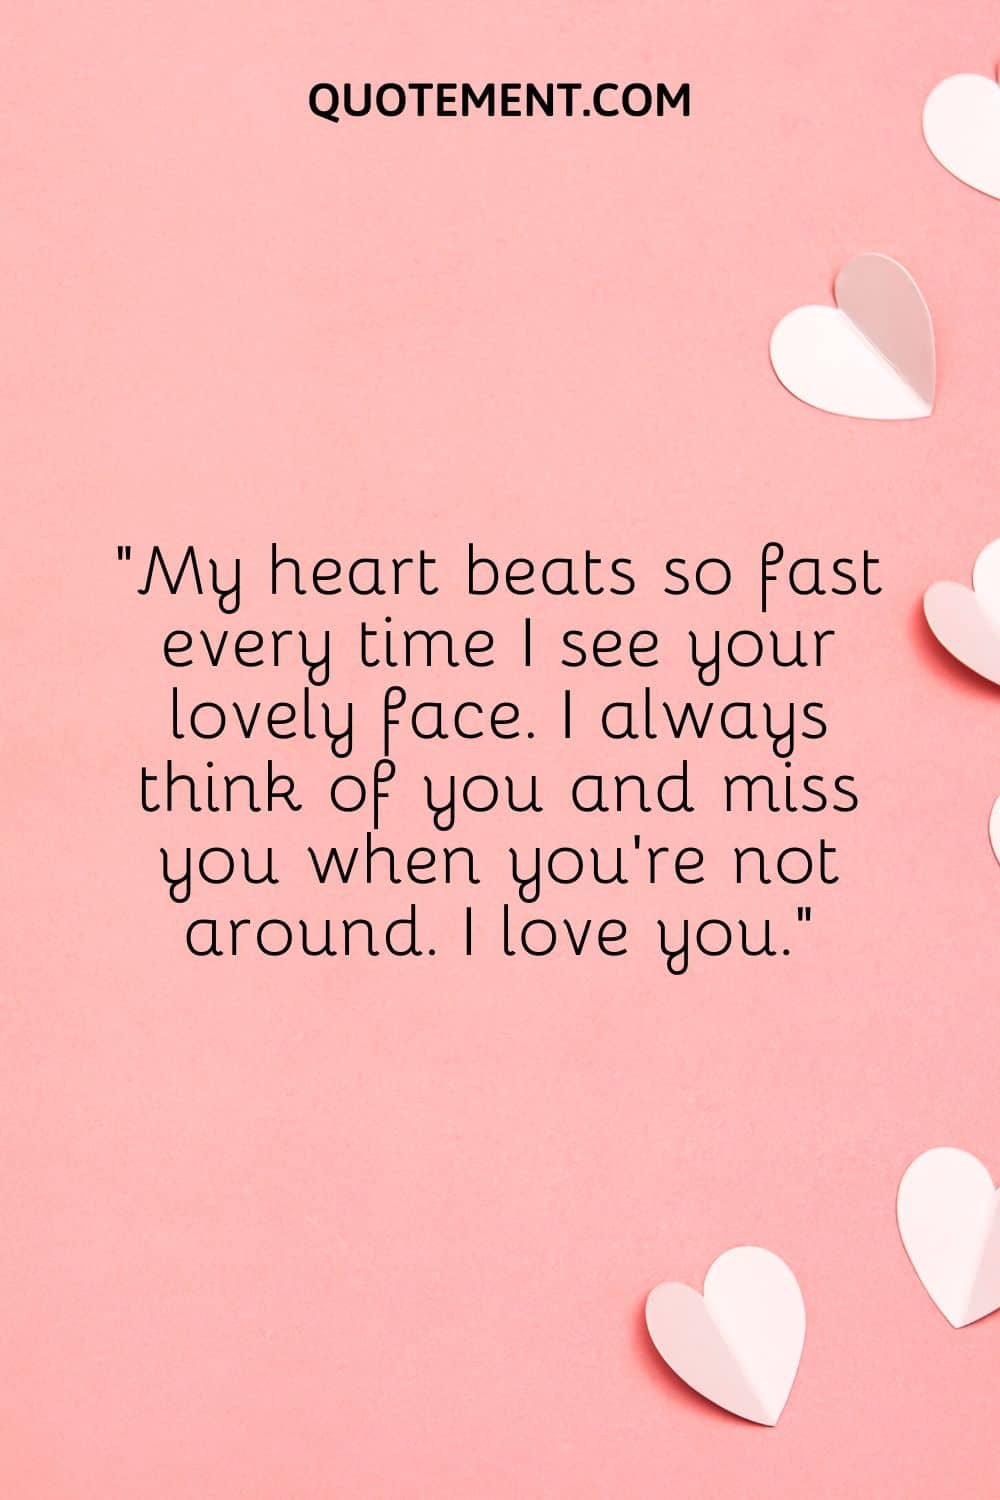 My heart beats so fast every time I see your lovely face.